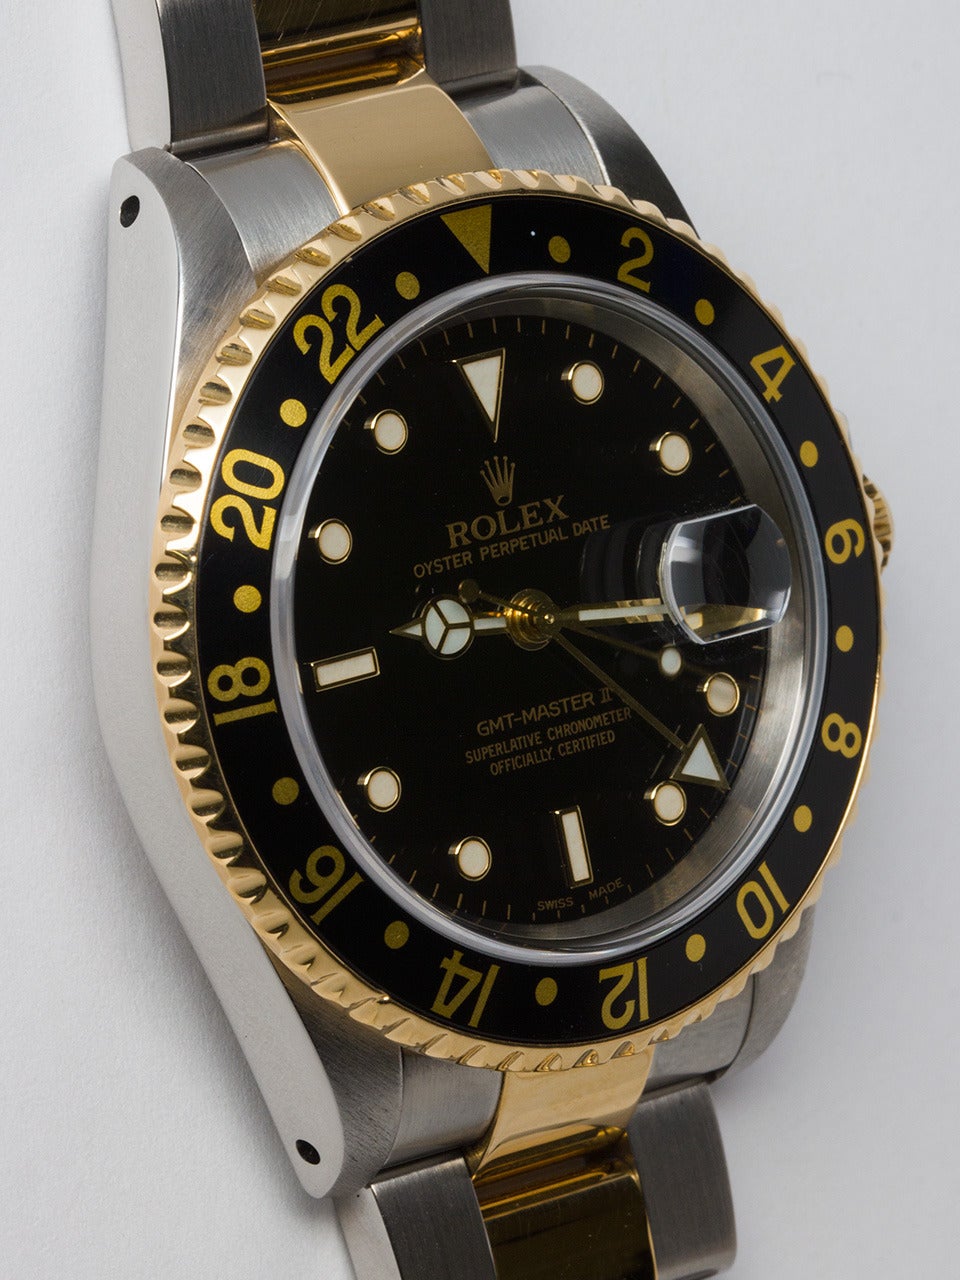 Rolex stainless steel and 18K yellow gold GMT-Master II, ref 16713, serial # P7 circa 2000. 40mm diameter case with sapphire crystal, black and gold 24 hour bezel, glossy black dial with Super-LumiNova indexes and hands. Powered by self wind